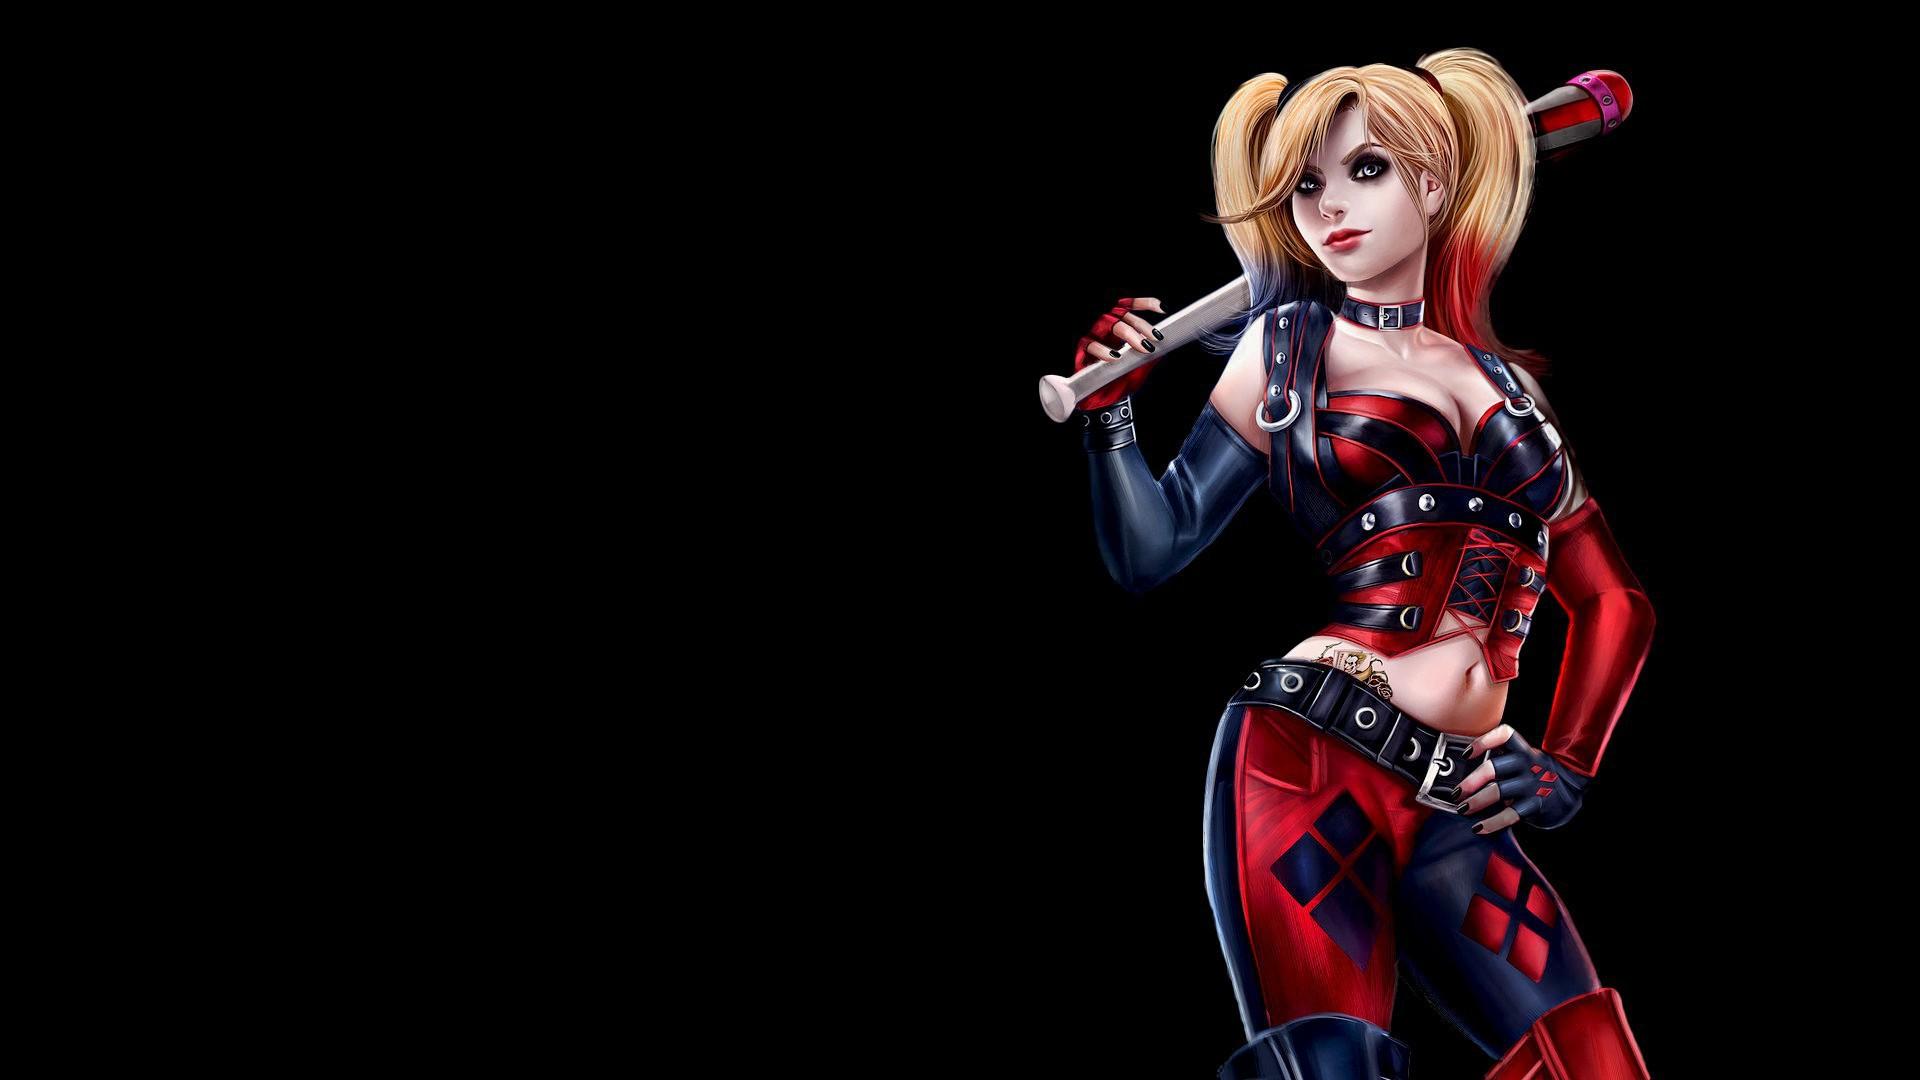 Harley Quinn Wallpaper Image Photo Picture Background